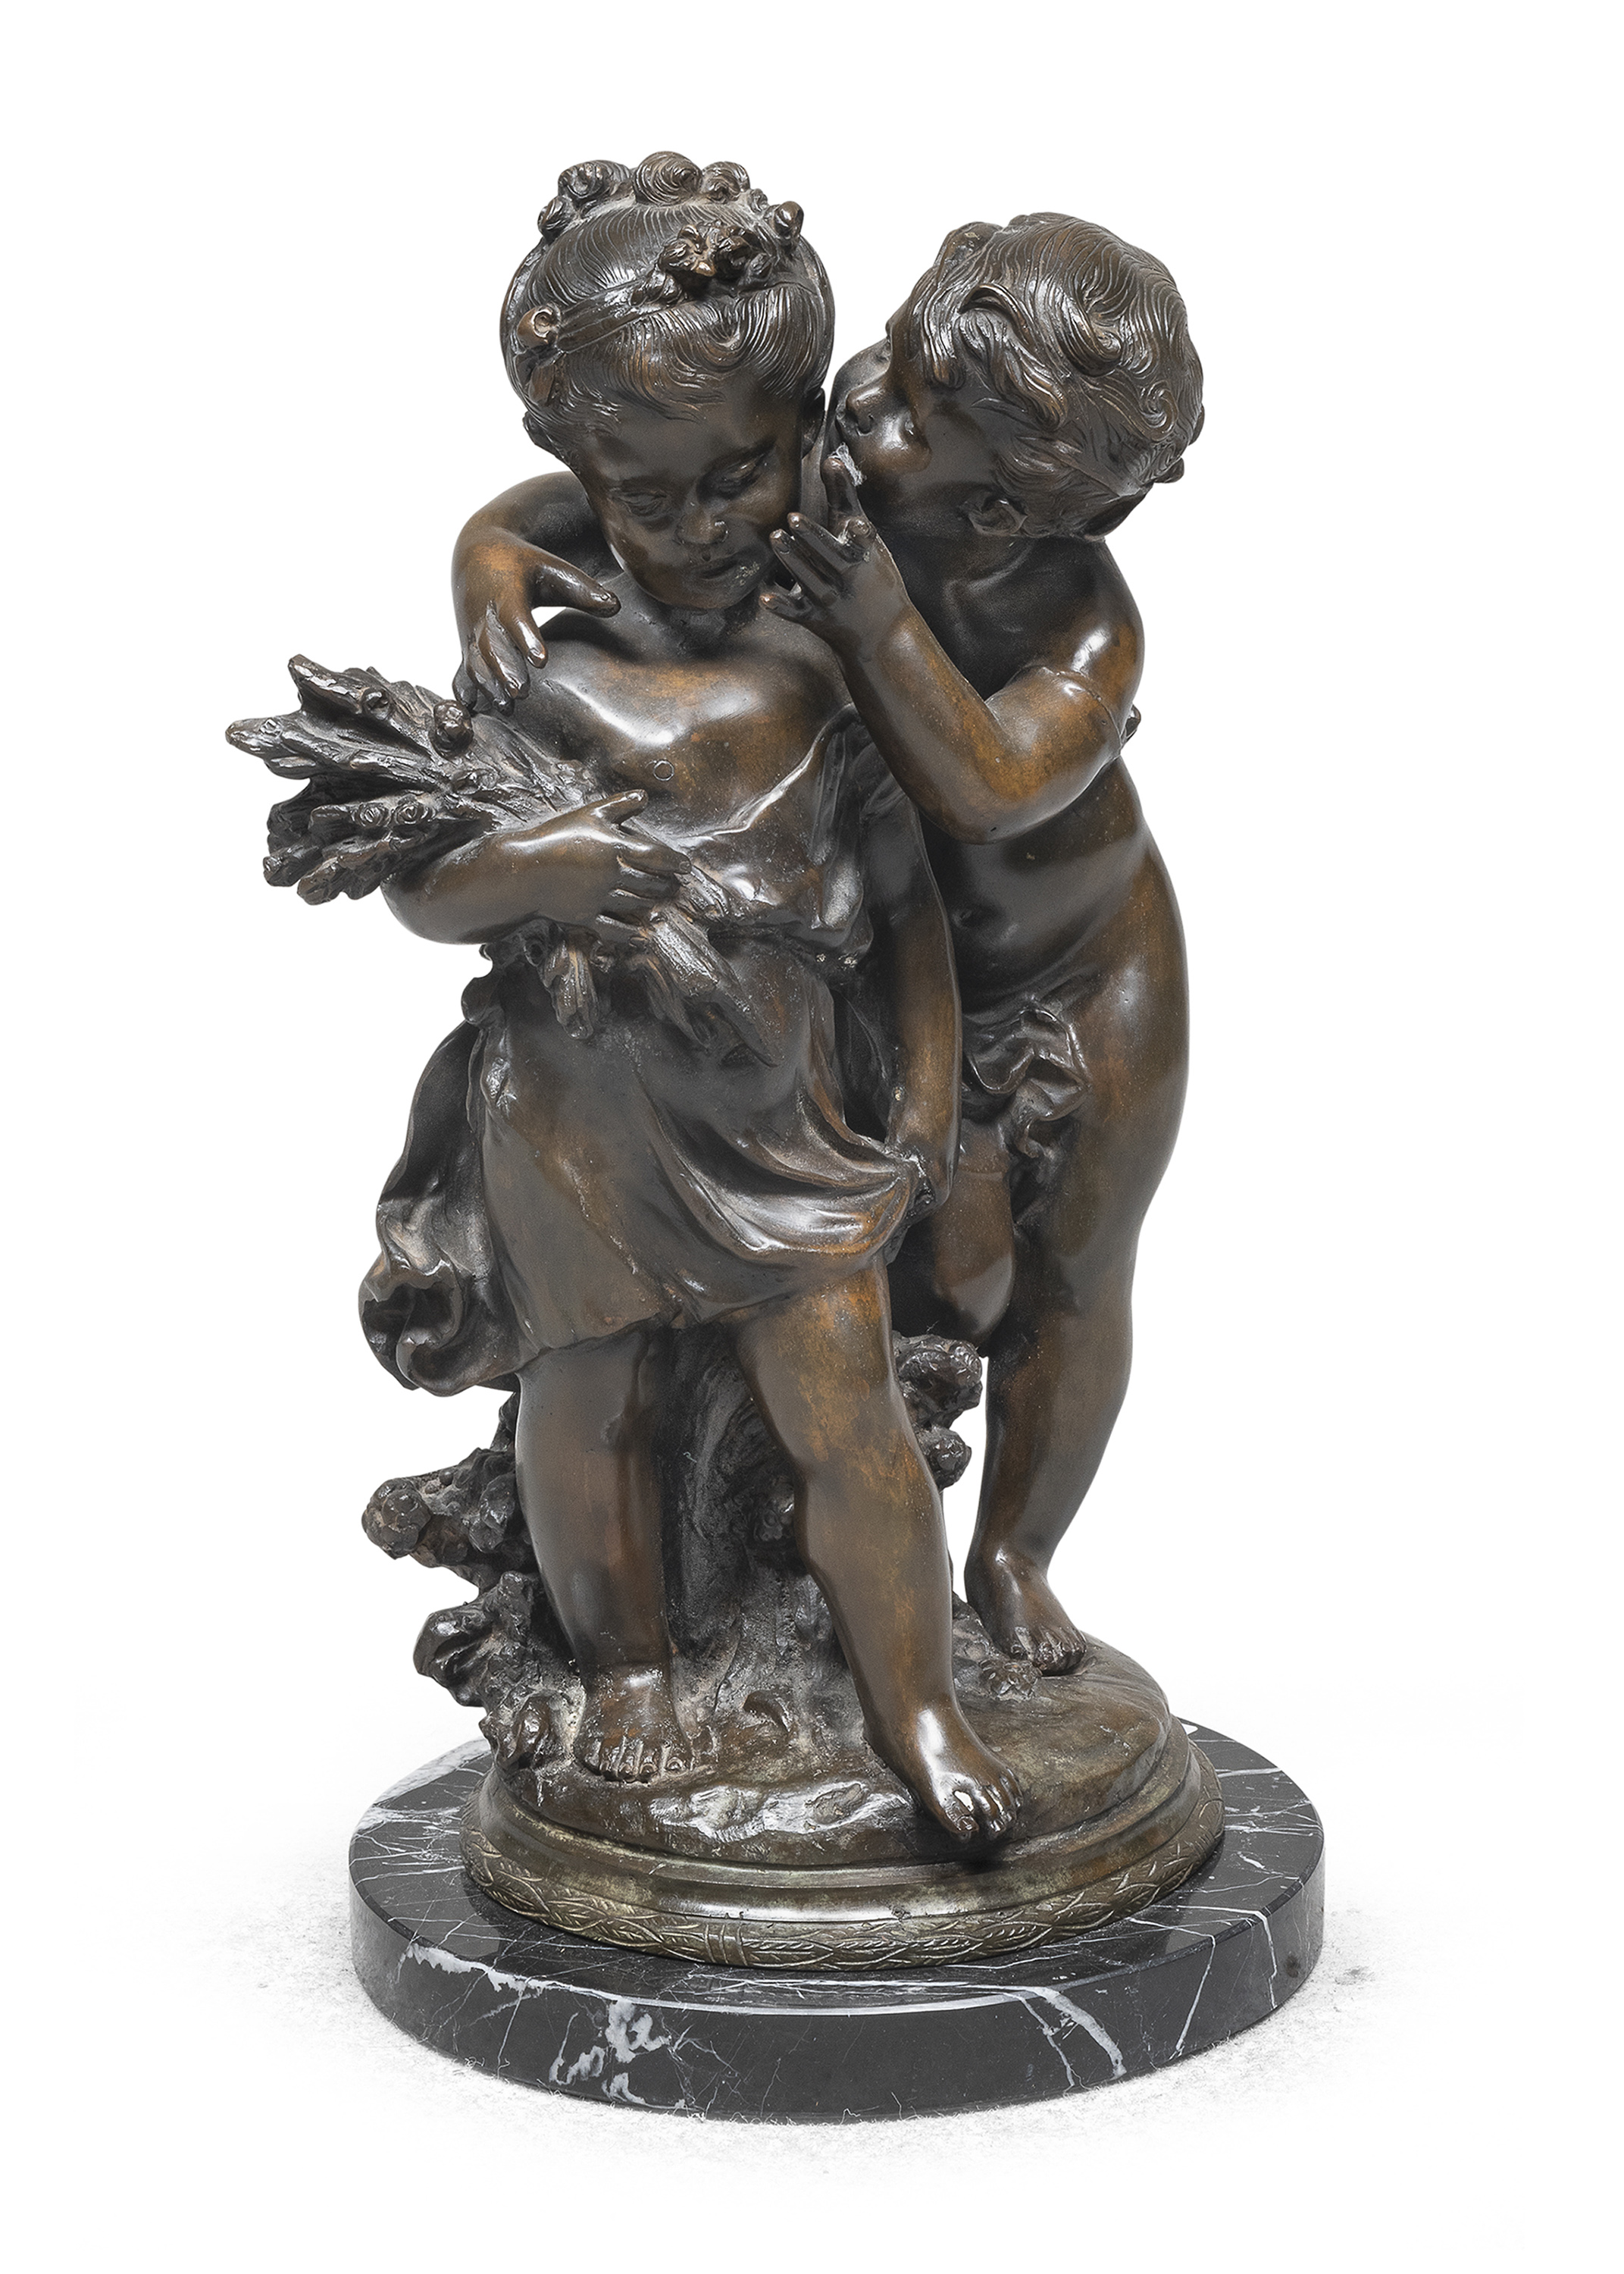 TWO FRENCH BRONZE PUTTO SCULPTURES 19TH CENTURY